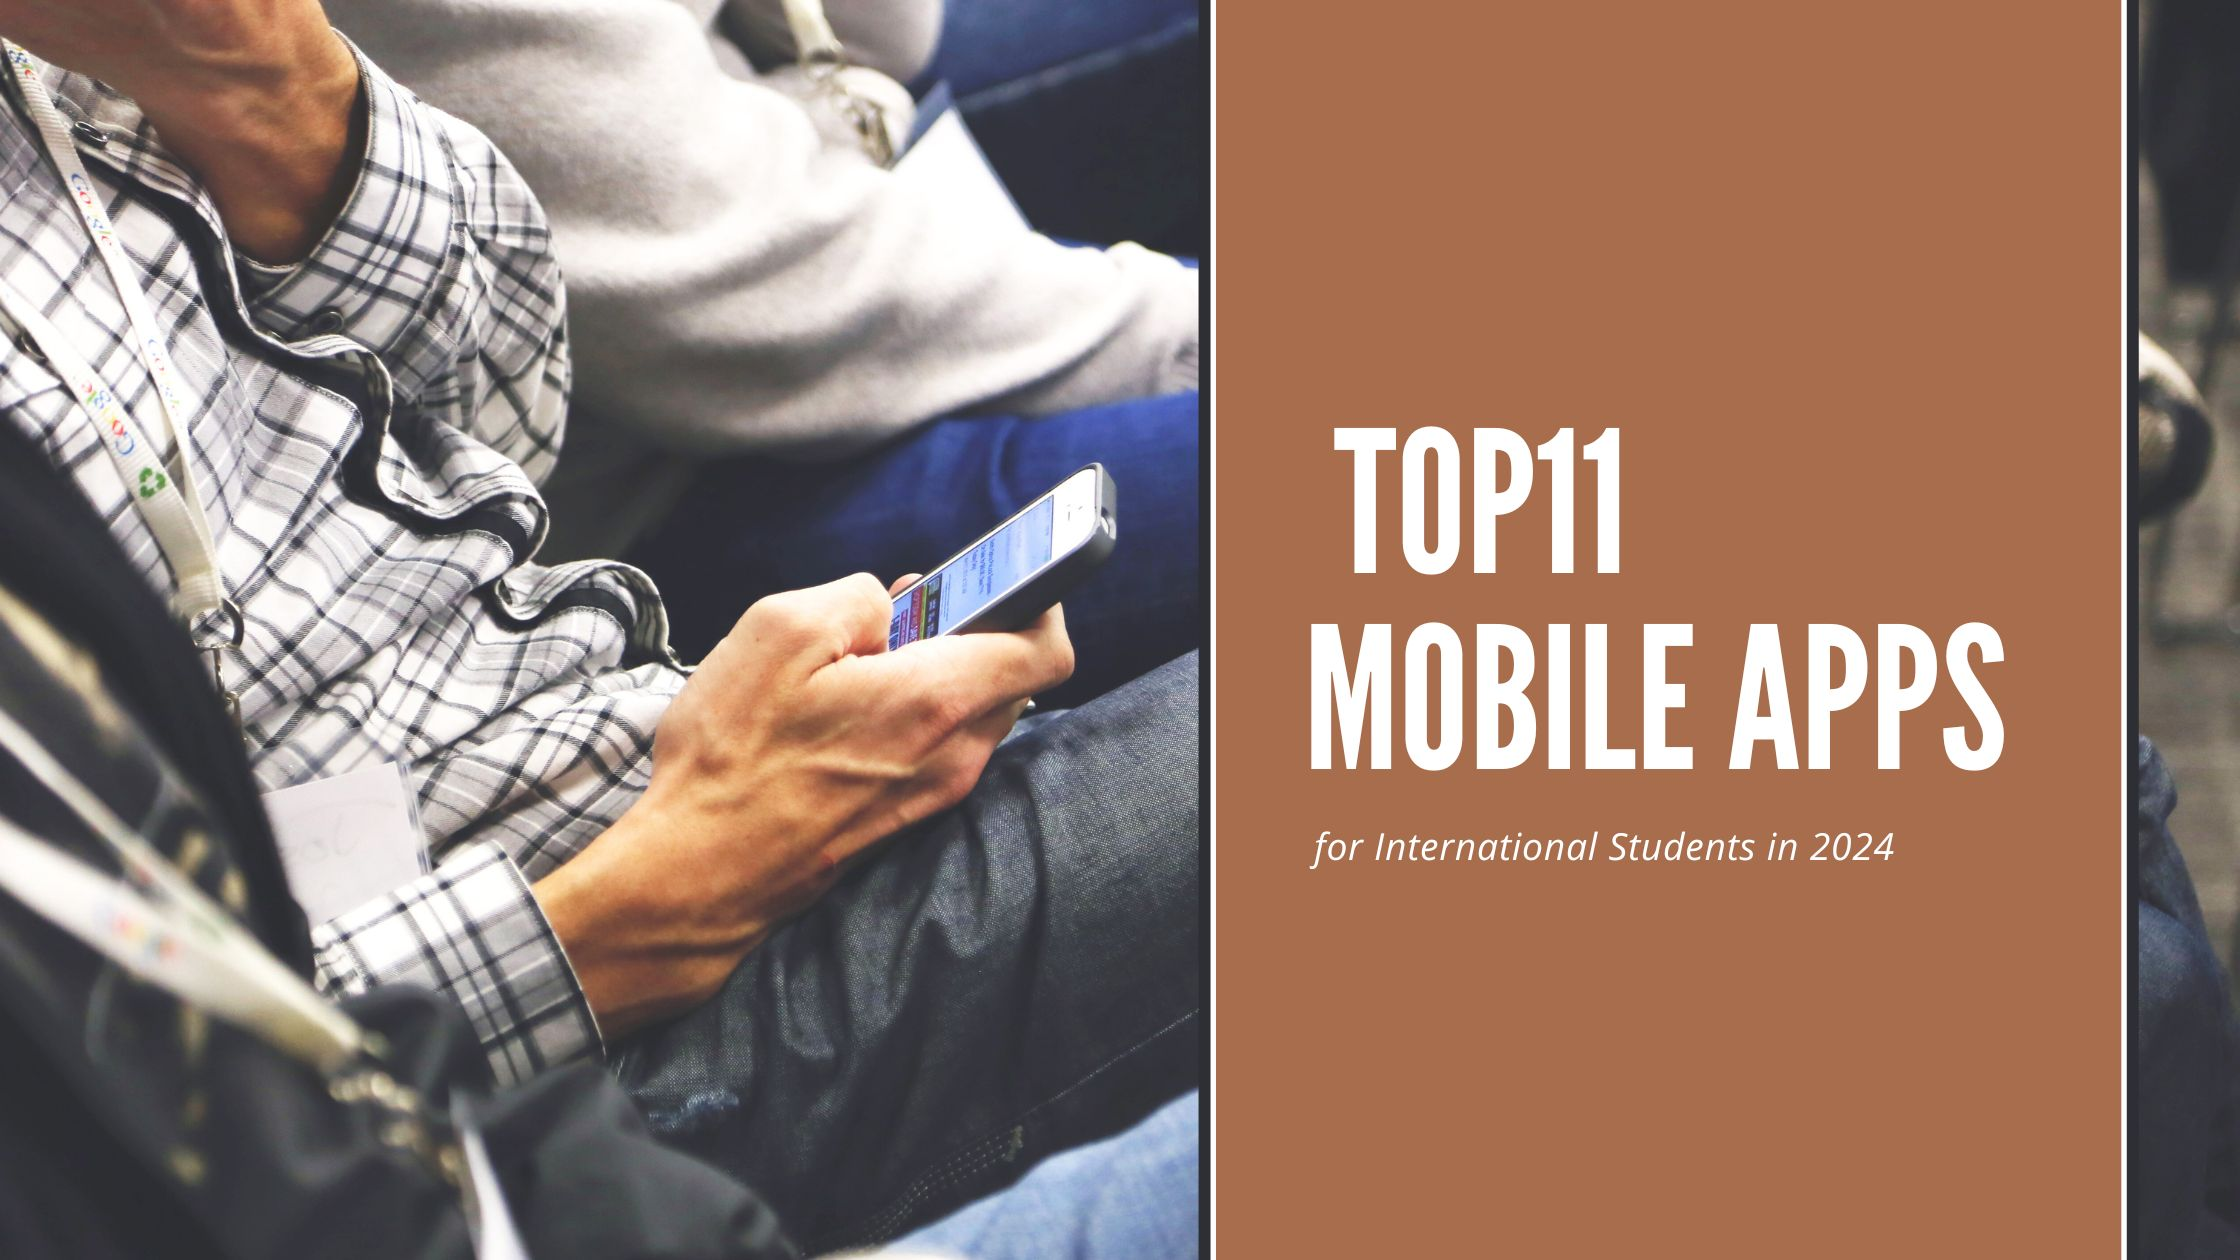 Globetrotter's Toolkit: Top11 Mobile Apps for International Students in 2024